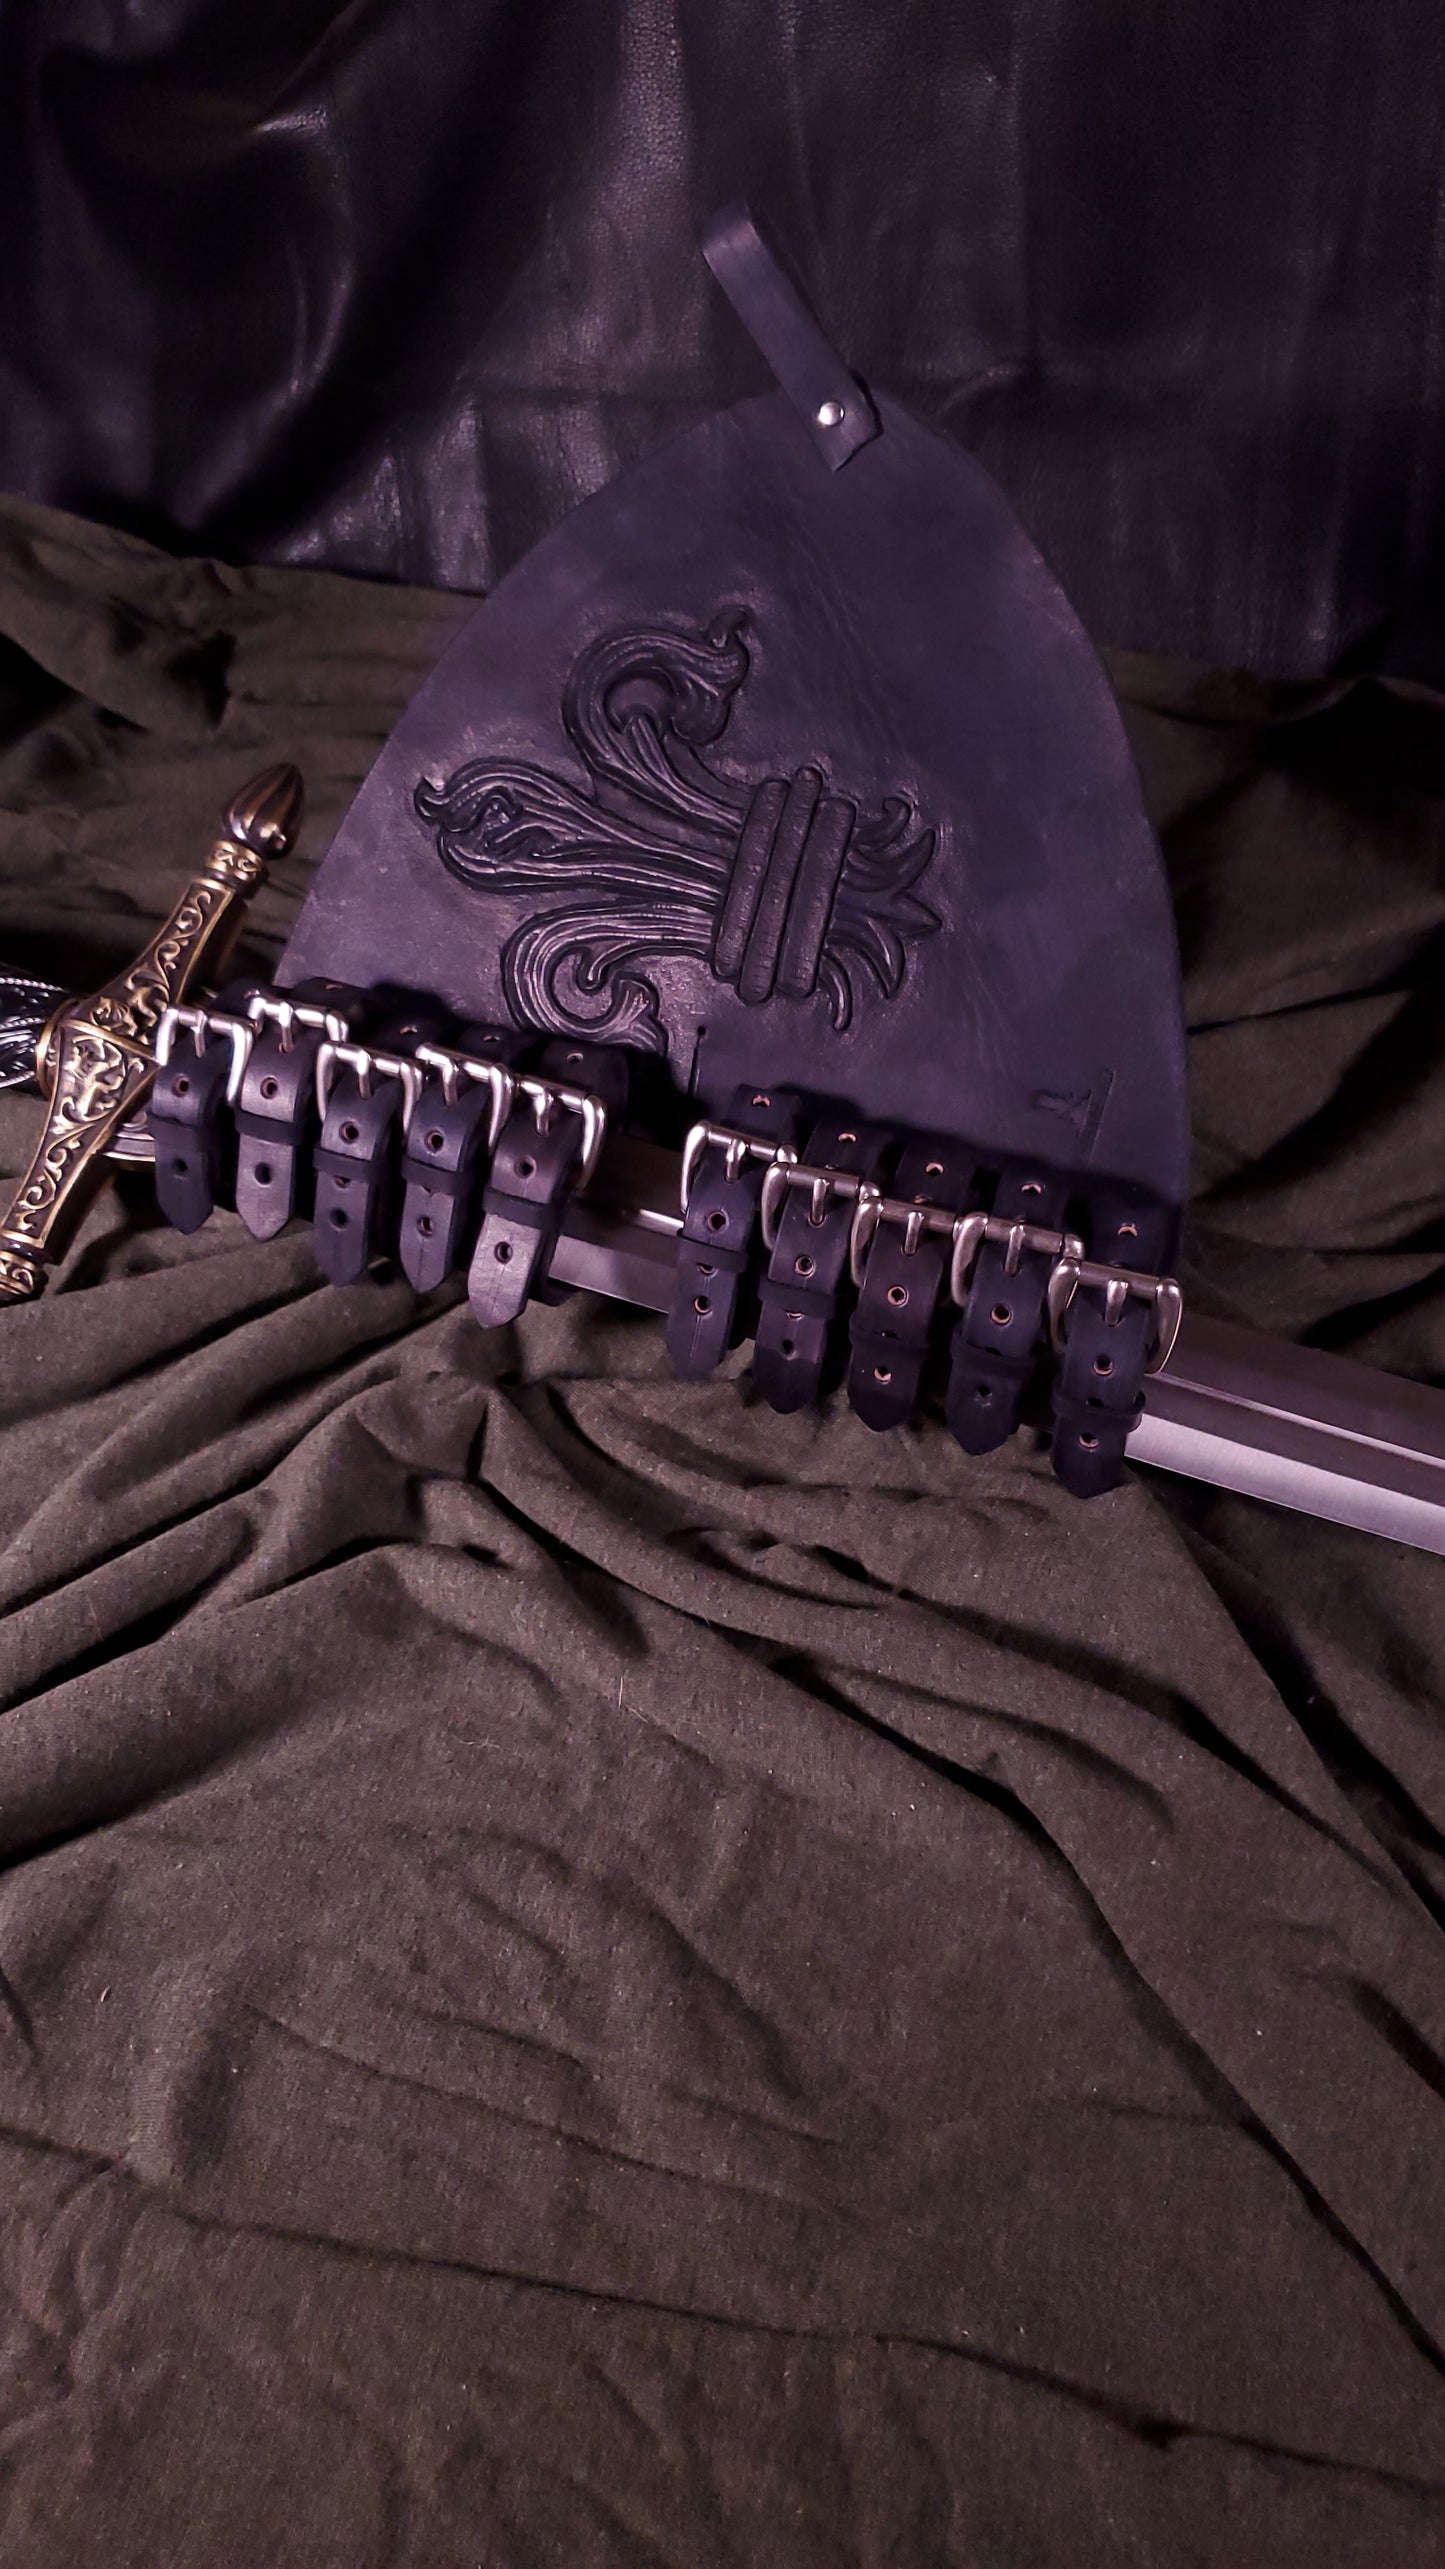 A sword carrier with a longsword in it. the sword carrier has a large Fleur De Lis tooled on the face of it. It also has two belt loops at the top and side. It also has ten nickel buckles where the sword goes into to adjust for your specific sword.